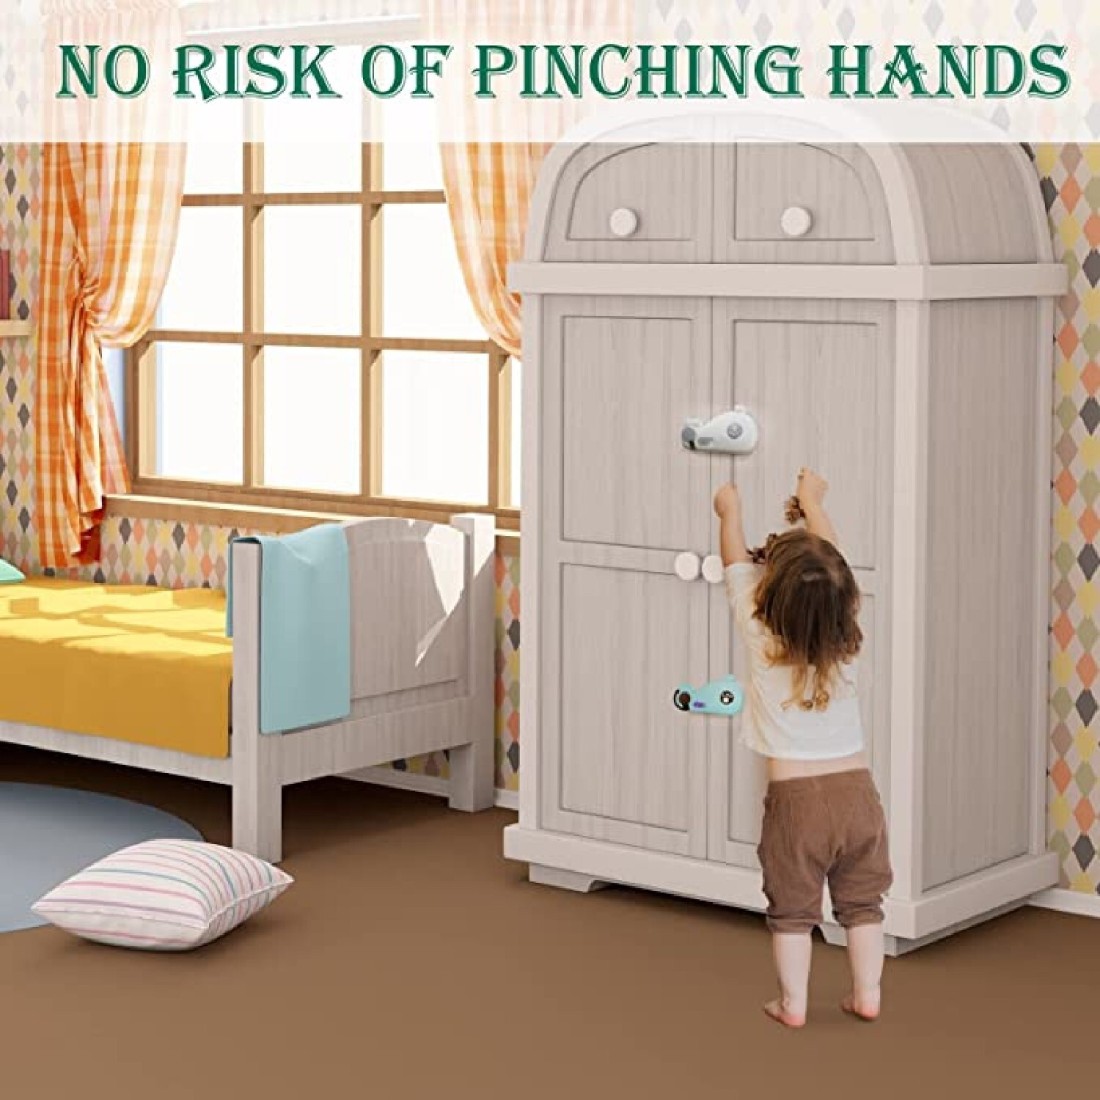 4Pcs Child Safety Baby Locks - Quick and Easy 3M Adhesive Cabinet